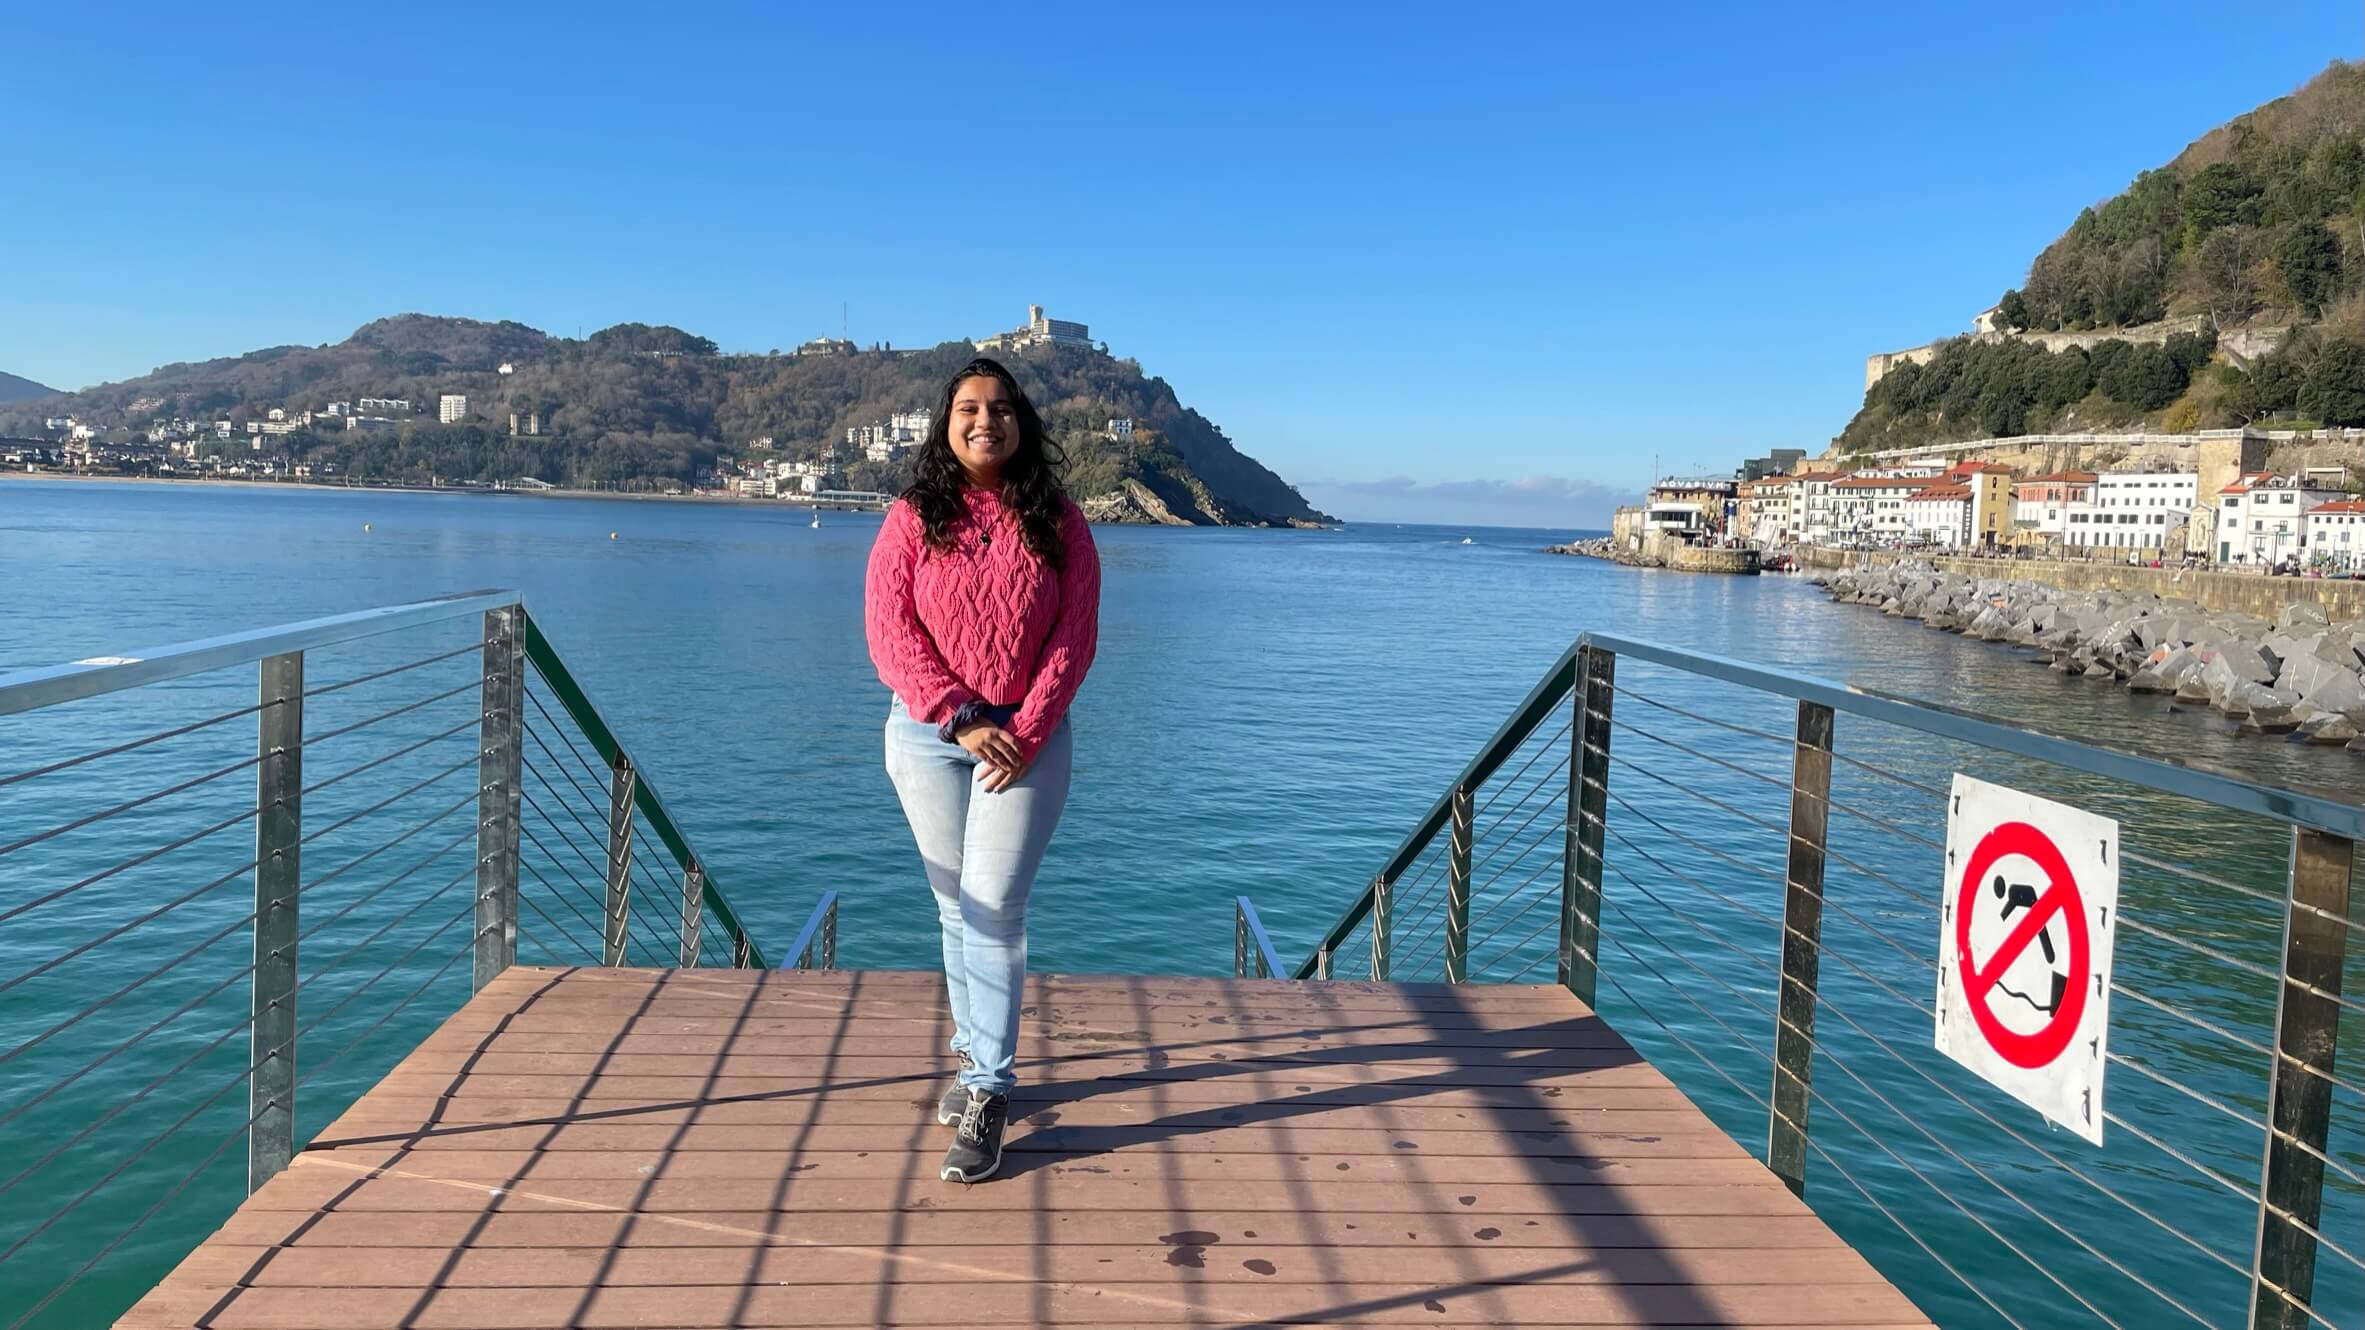 The image shows a digital nomad Sharvani Chandvale in Spain